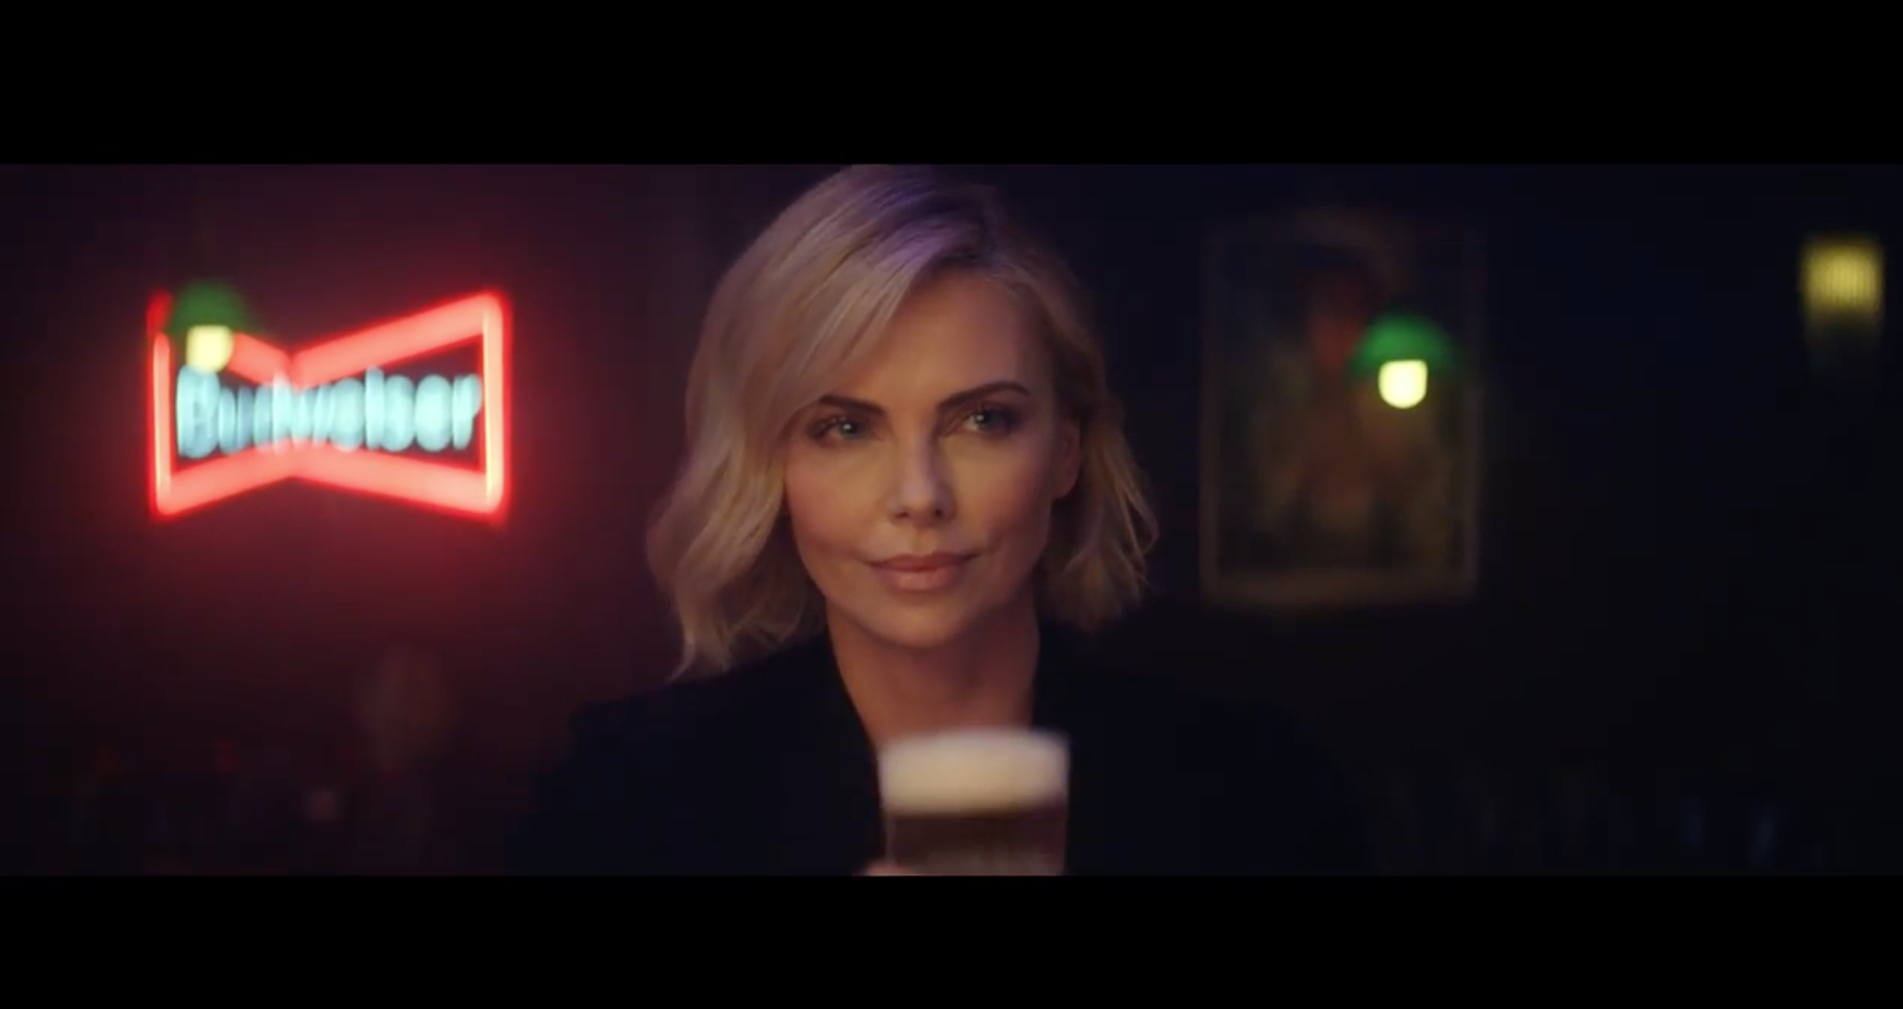 WATCH BUDWEISER'S OSCARS AD STARRING CHARLIZE THERON